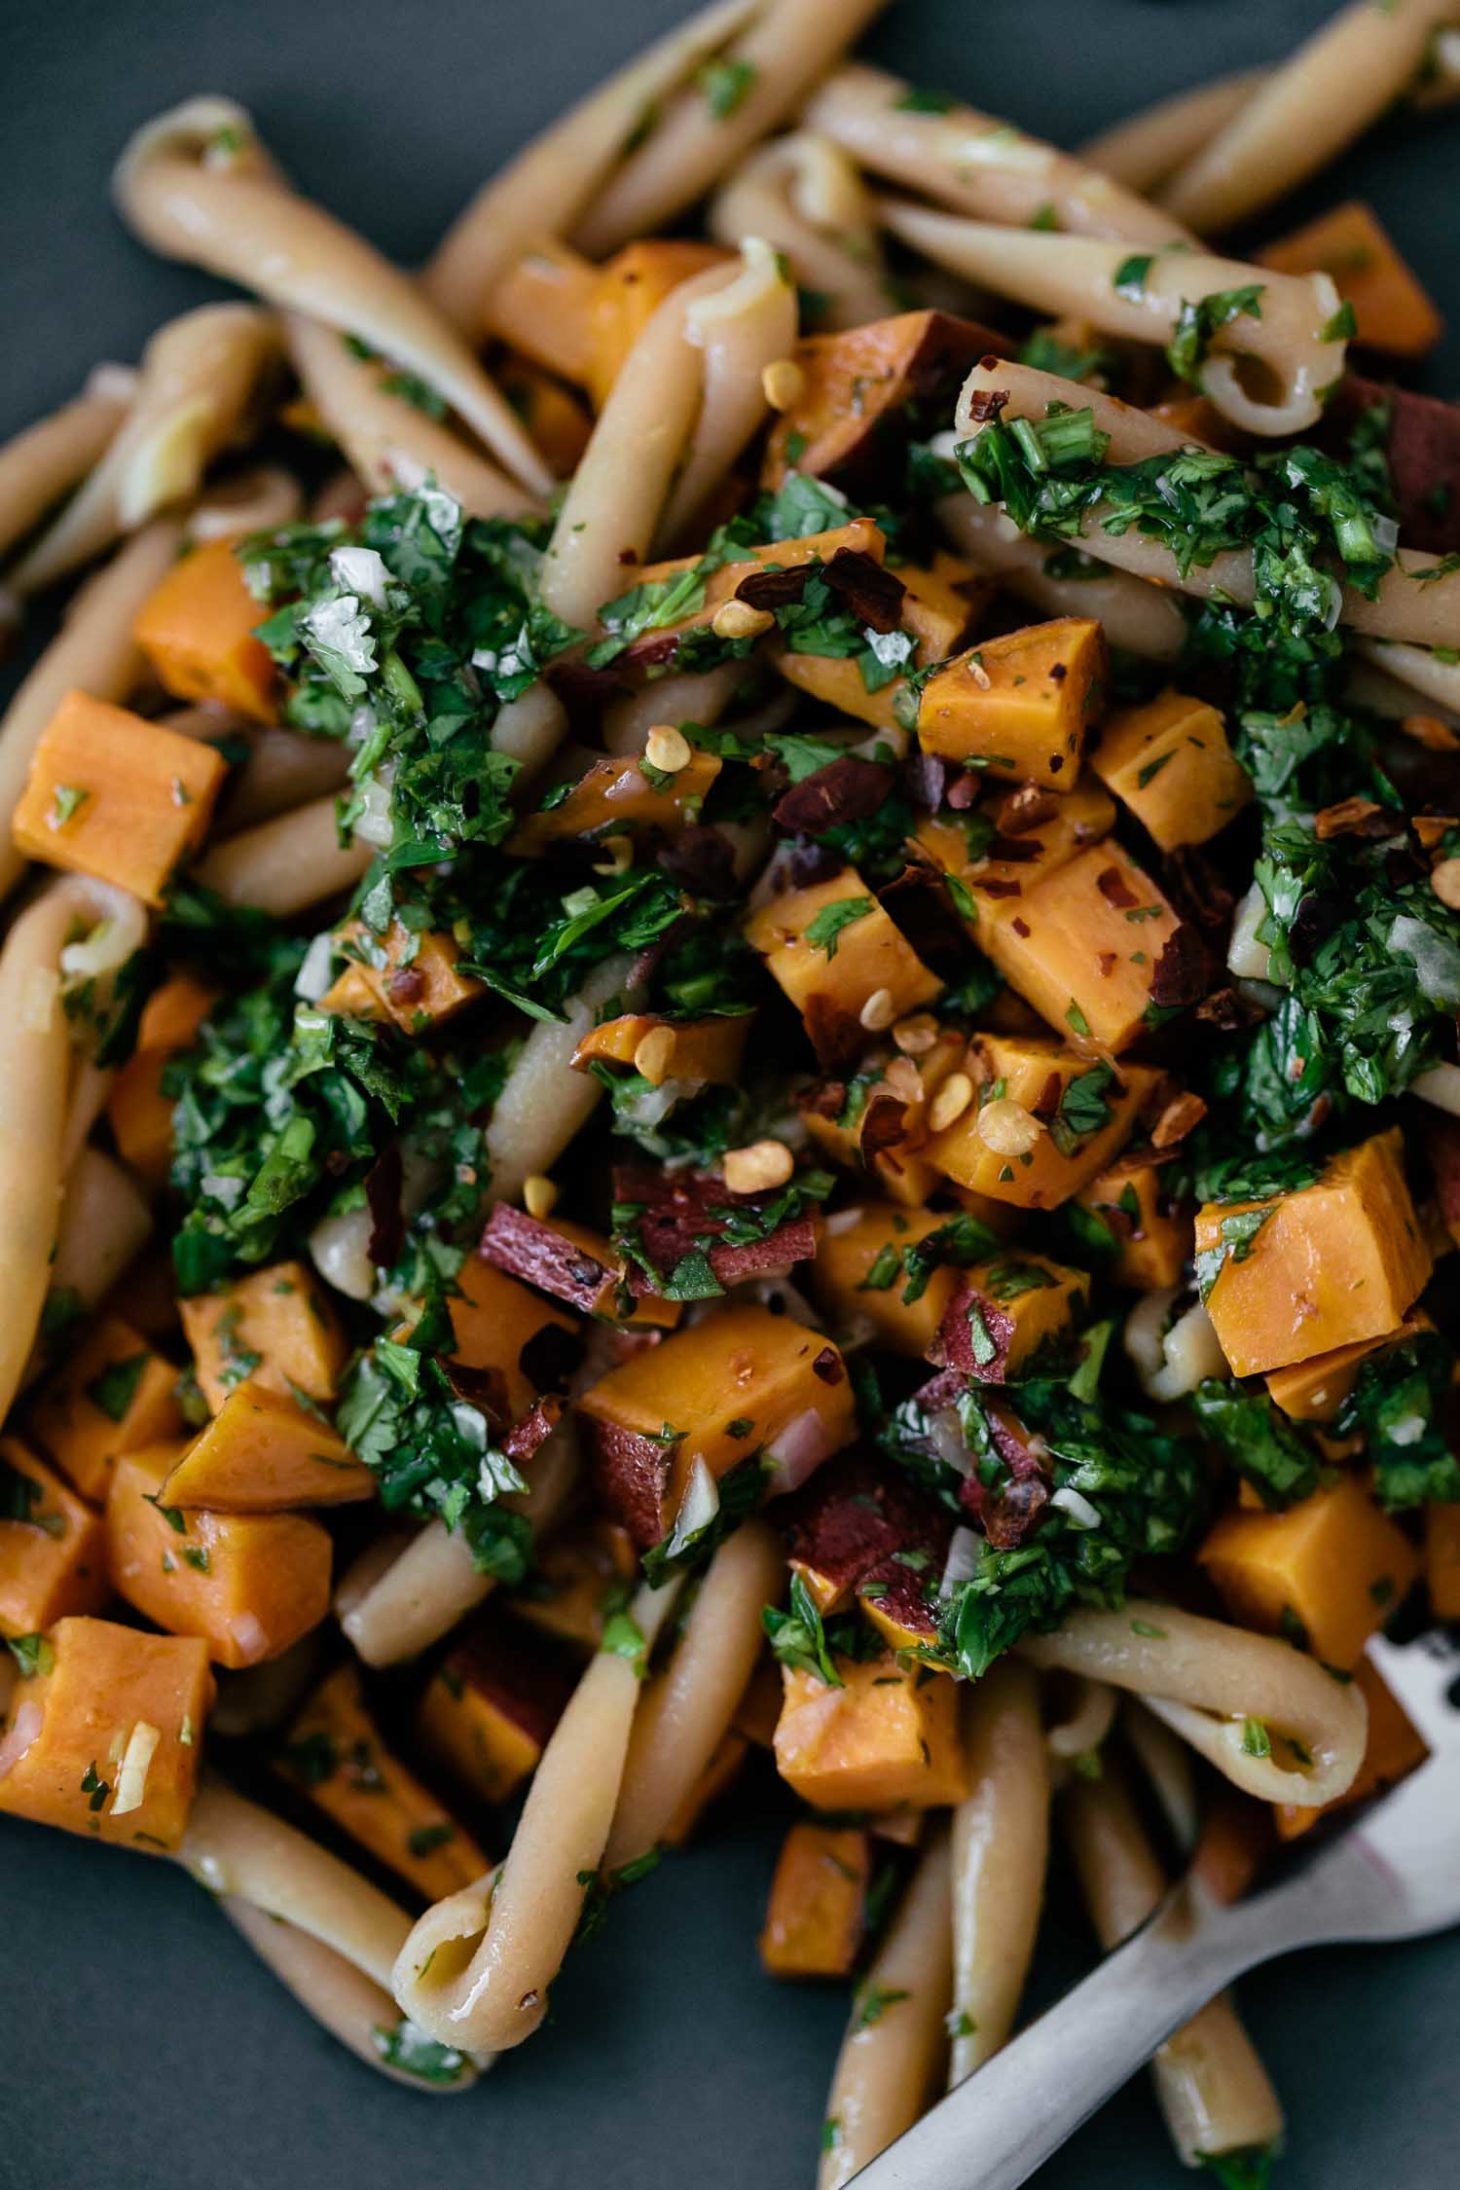 Chickpea Casarecce Pasta with Roasted Sweet Potatoes and Chimichurri